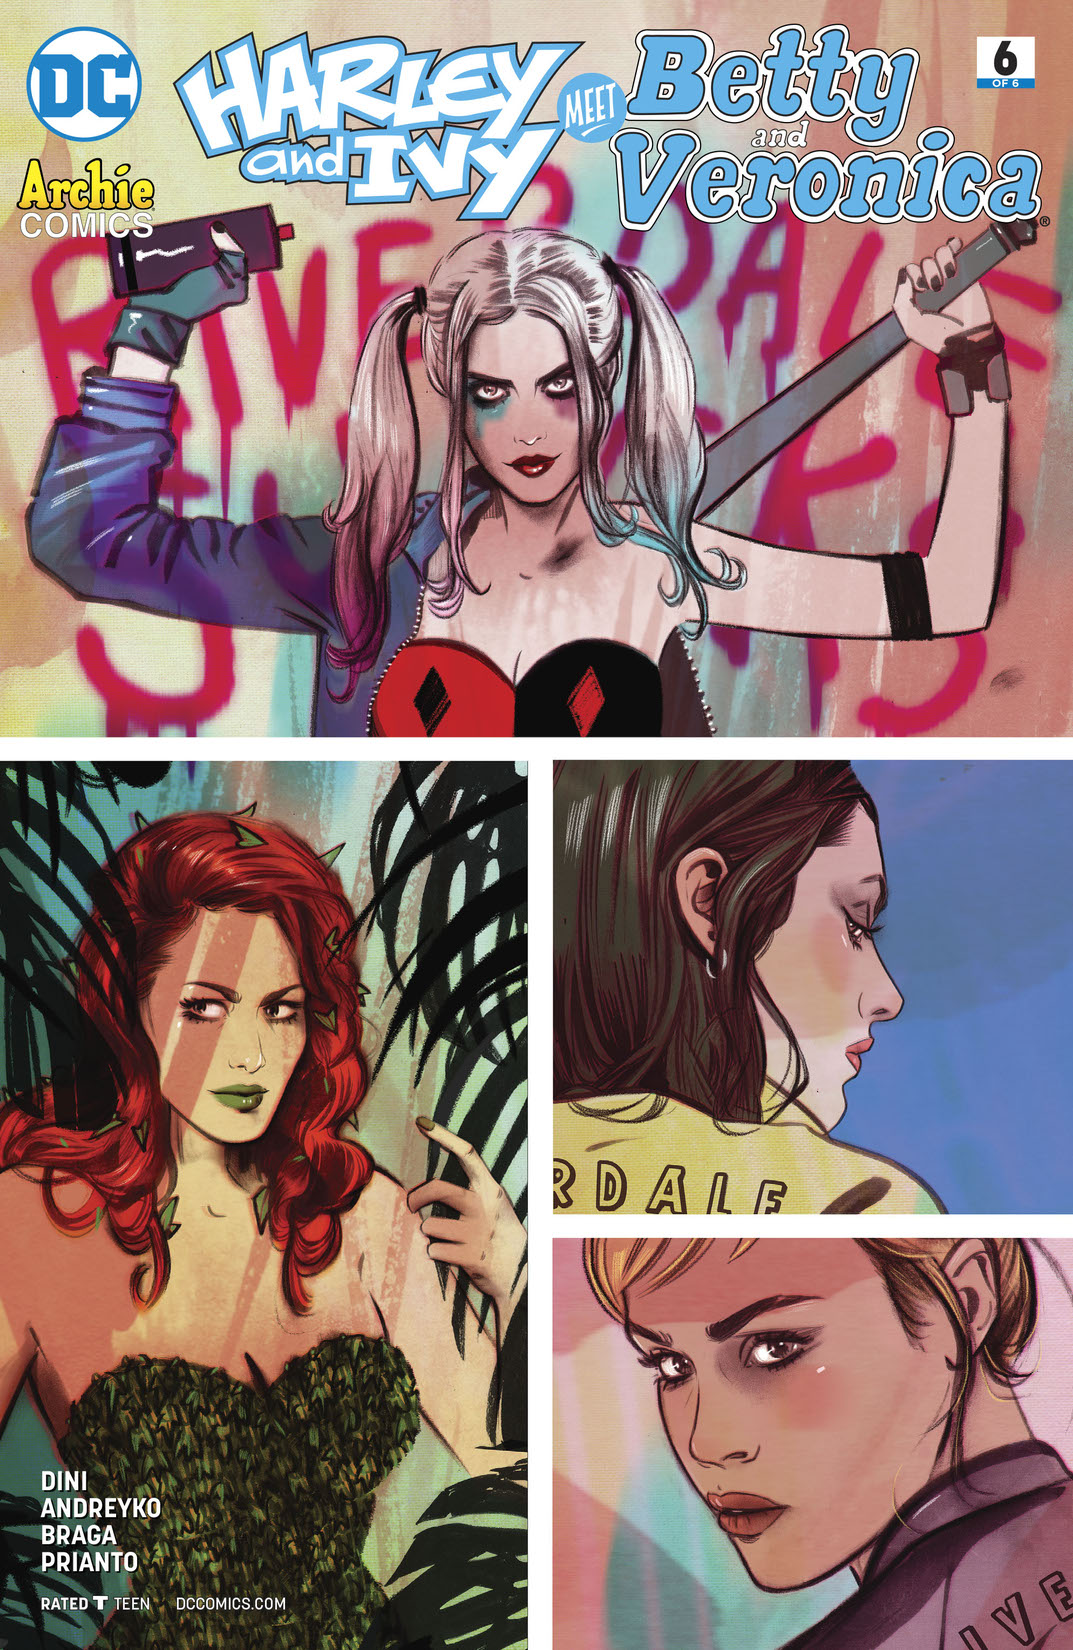 Harley & Ivy Meet Betty and Veronica #6 preview images